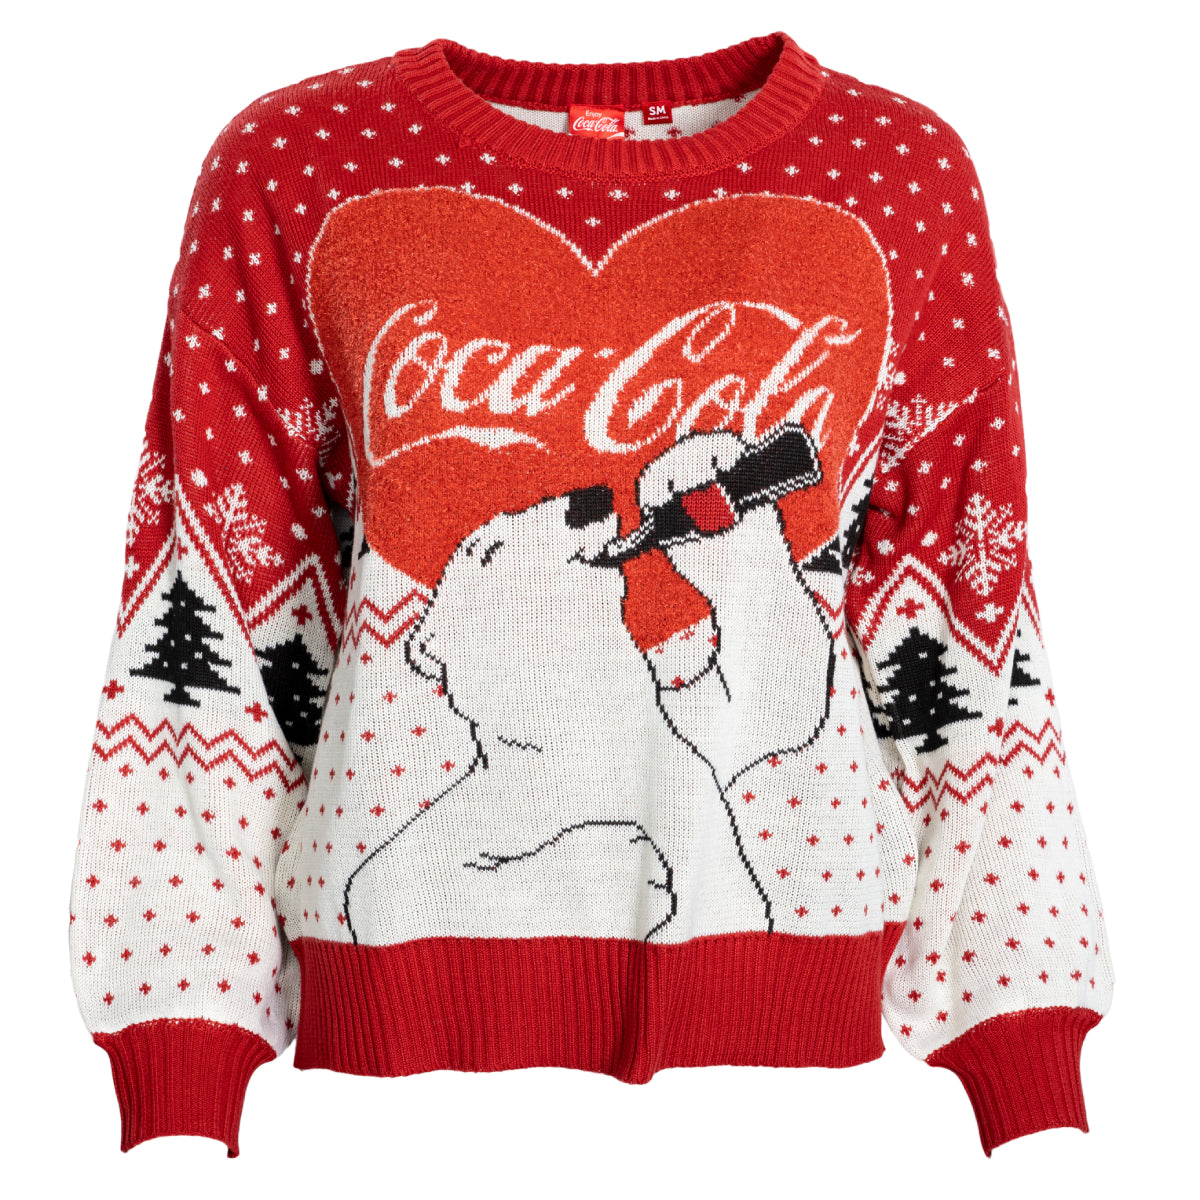 Coca-Cola Heart Bear Spread Joy with Festive Ugly Sweater Christmas Sweaters